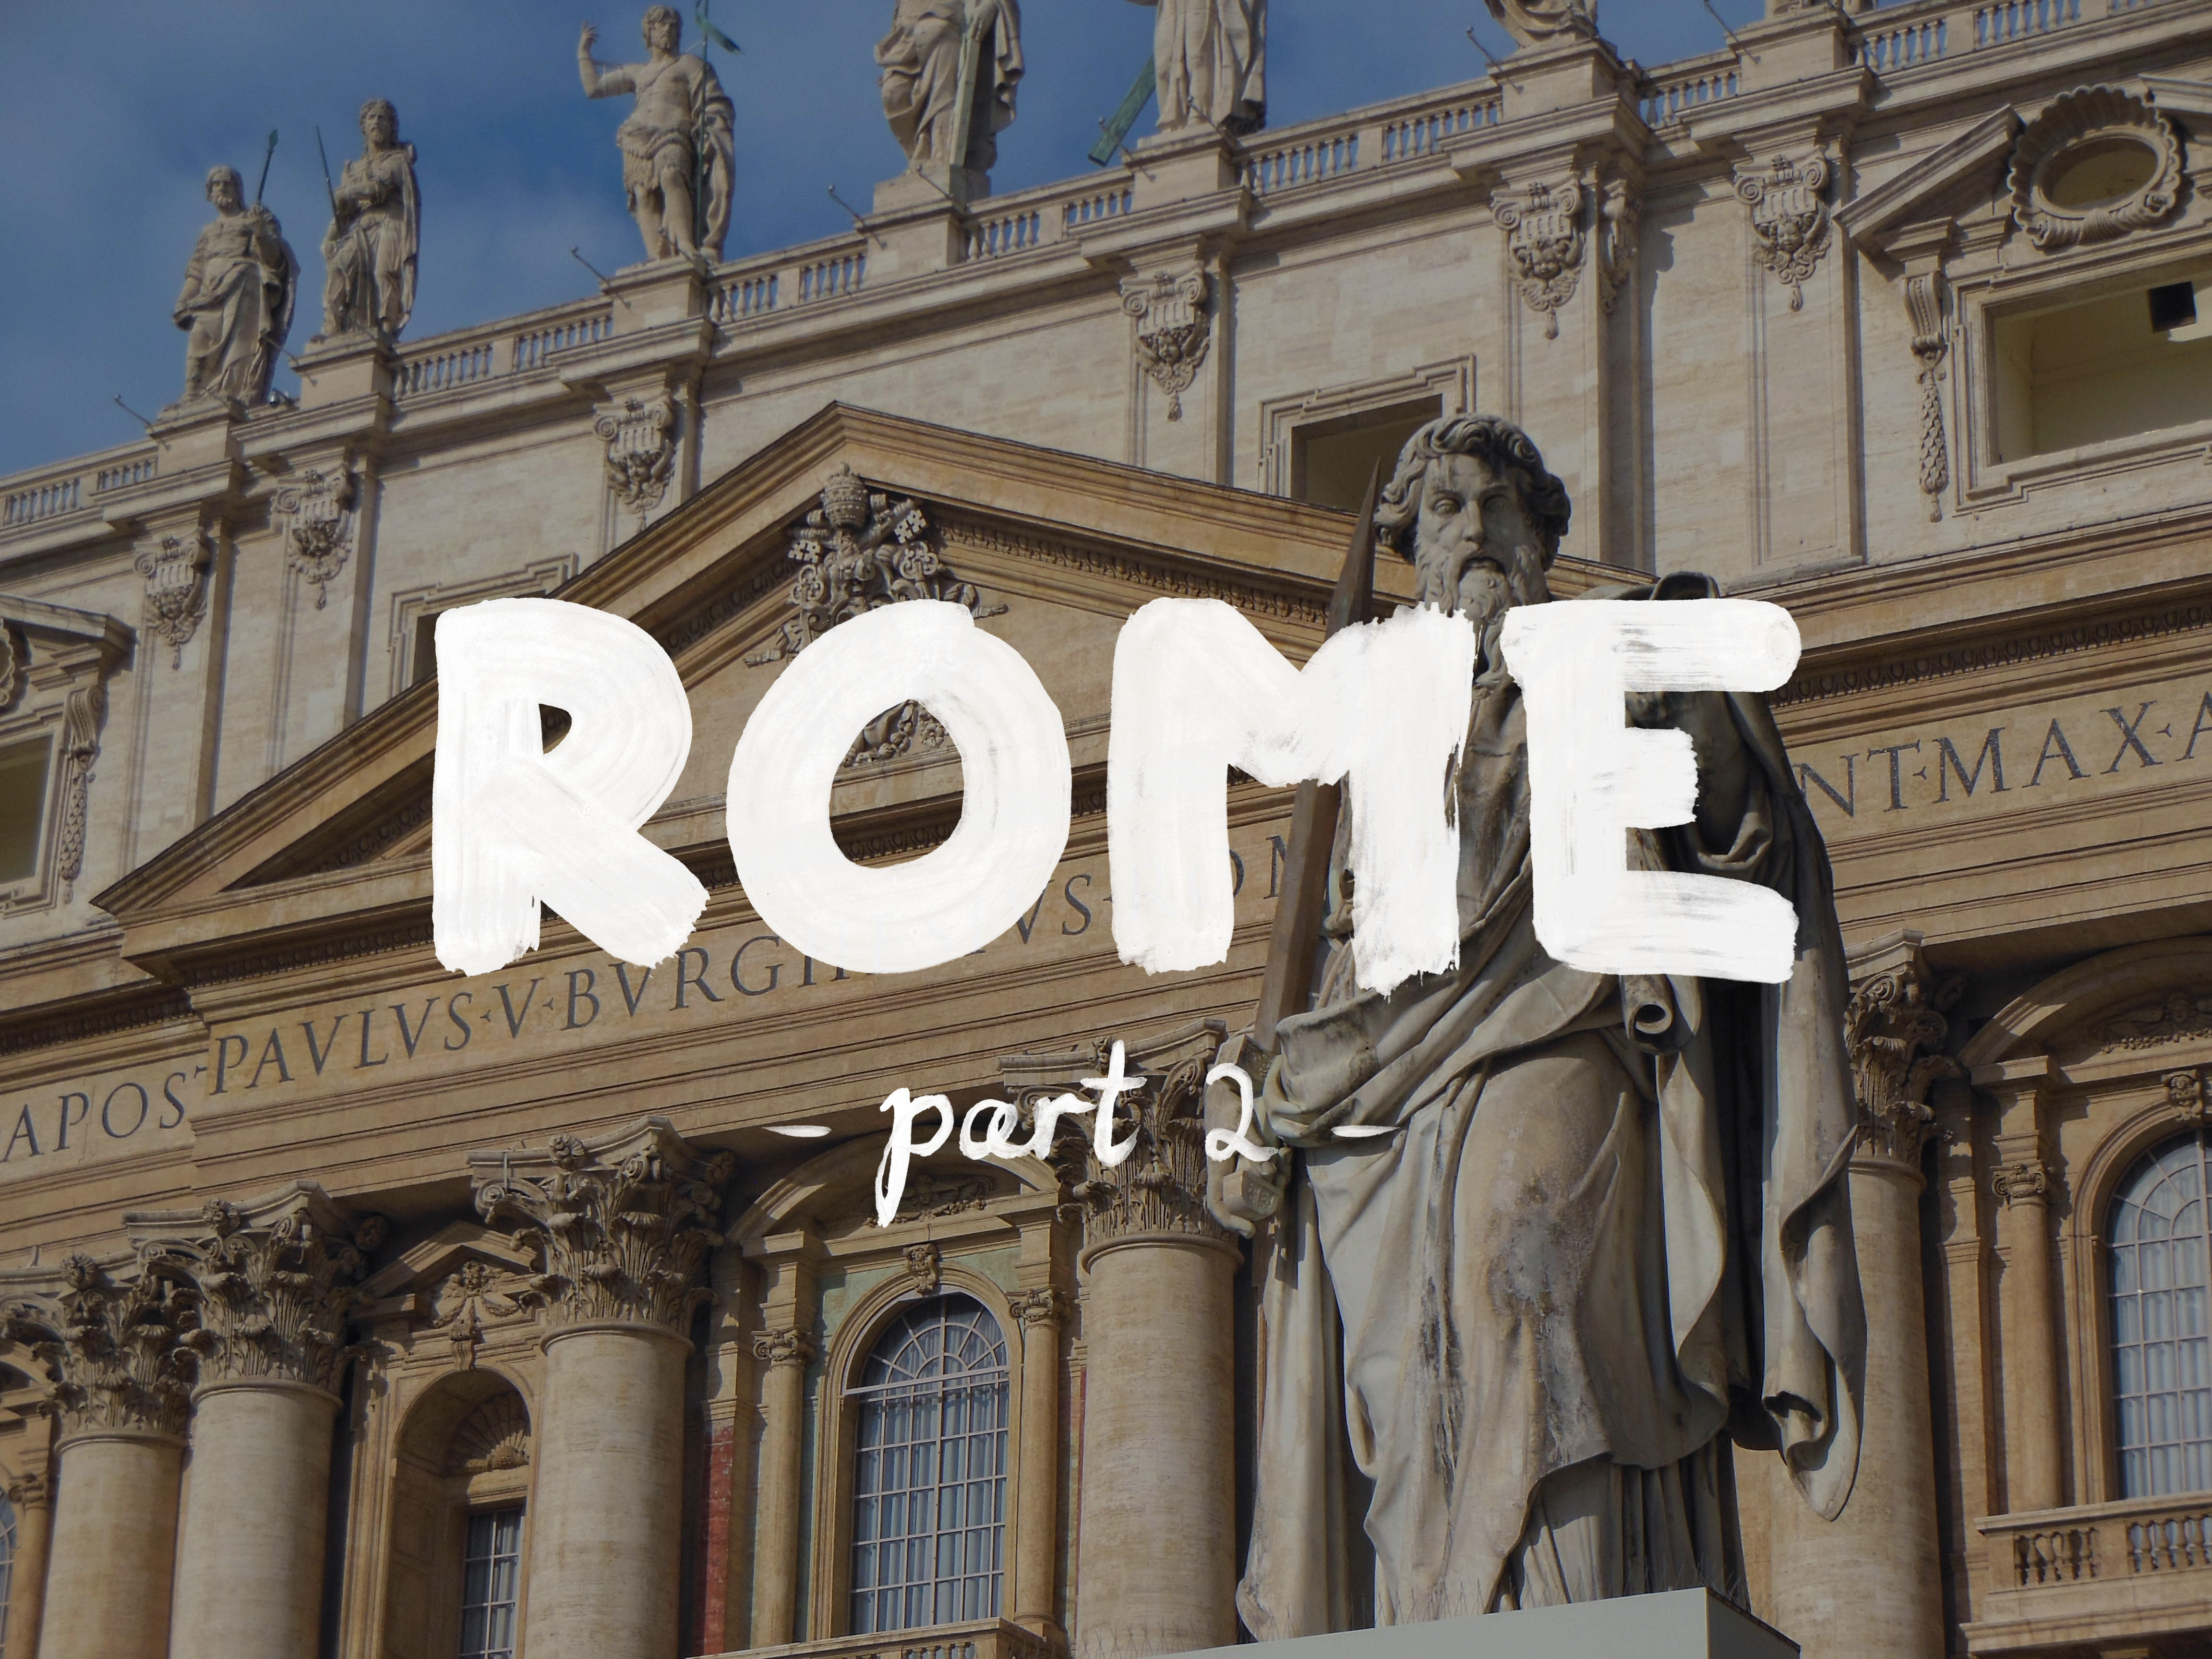 Italy 2016 – Exploring outside Rome